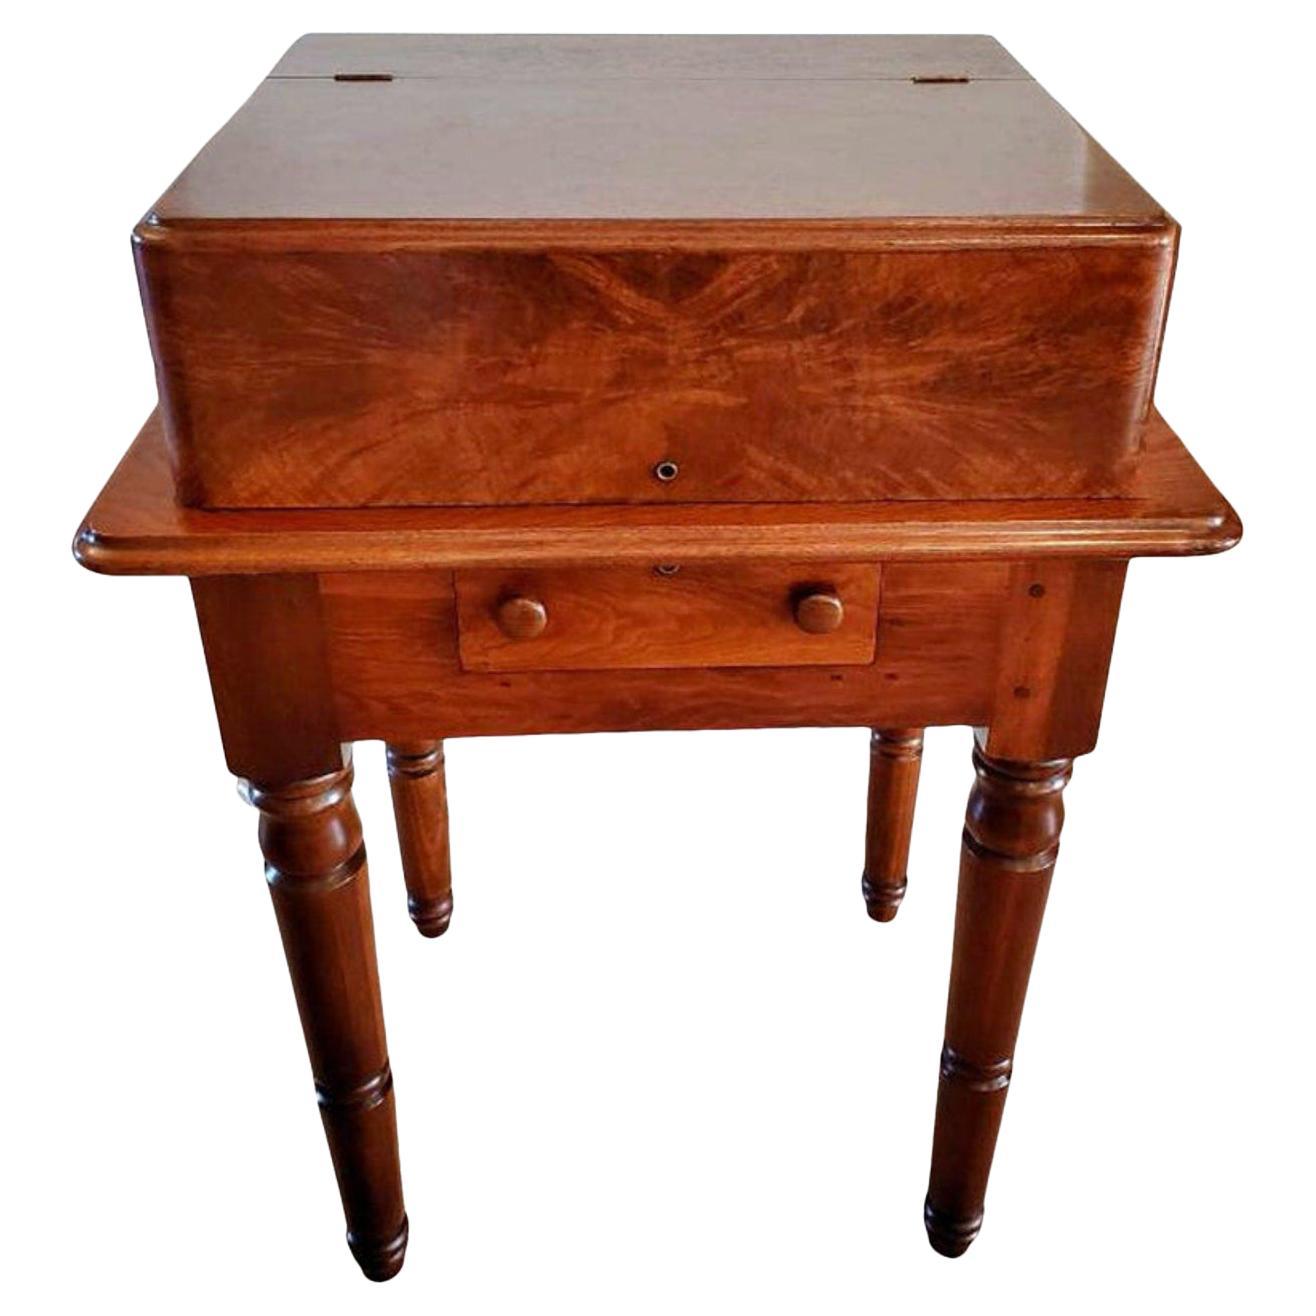 Early 19th Century American Sheraton Mahogany Campaign Officers Desk